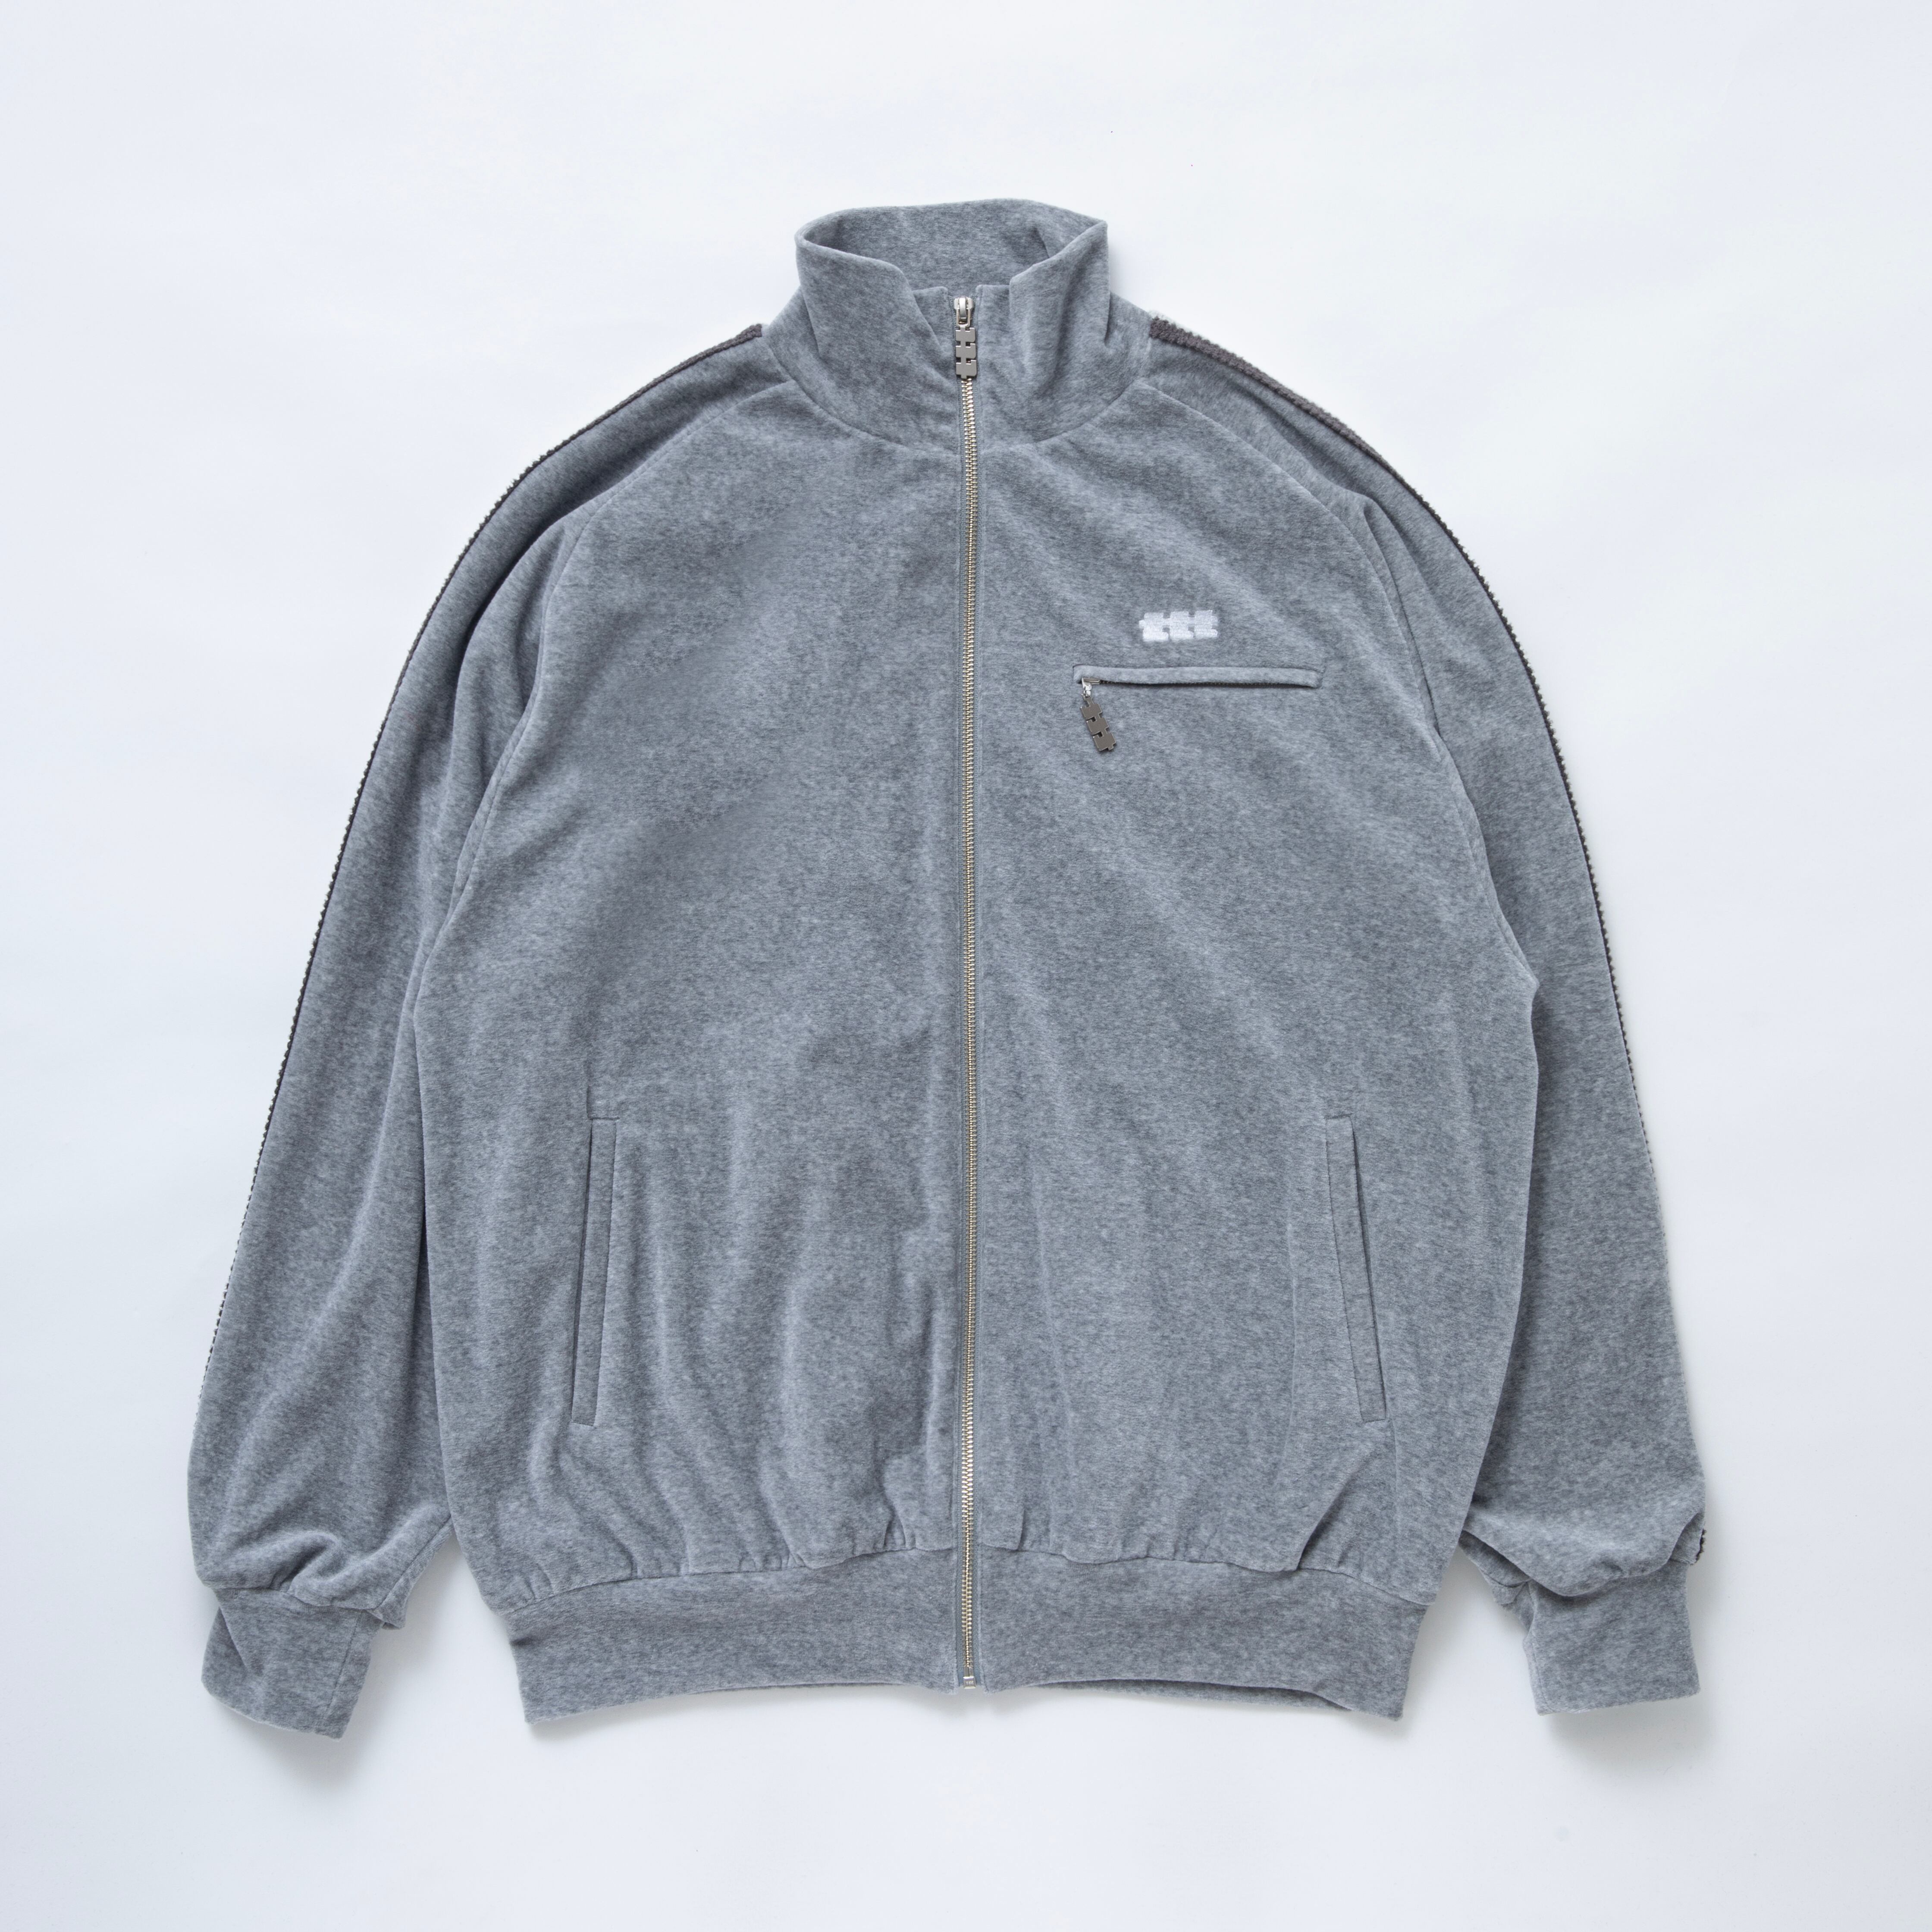 Velours track suit jacket (GRAY)